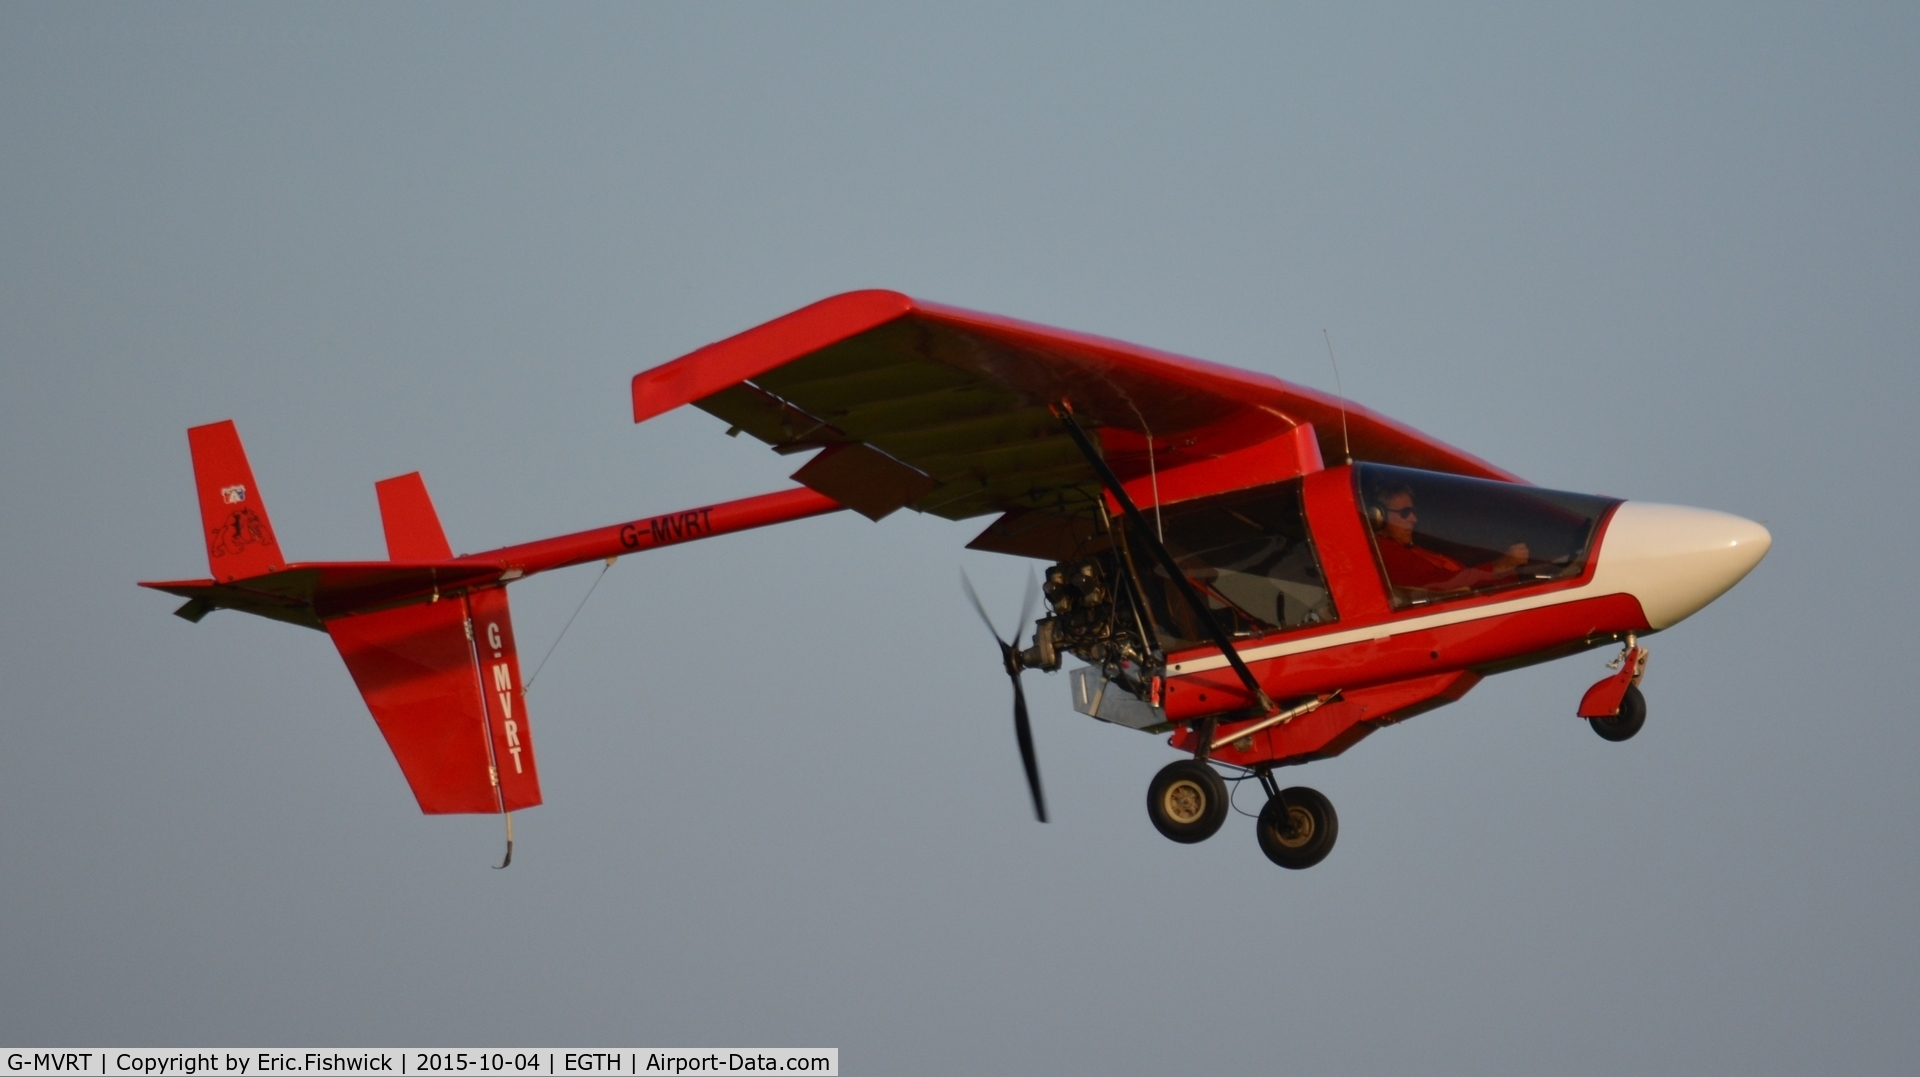 G-MVRT, 1989 CFM Shadow Series CD C/N 104, 43. G-MVRT departing The Shuttleworth 'Uncovered' Airshow (Finale,) Oct. 2015.